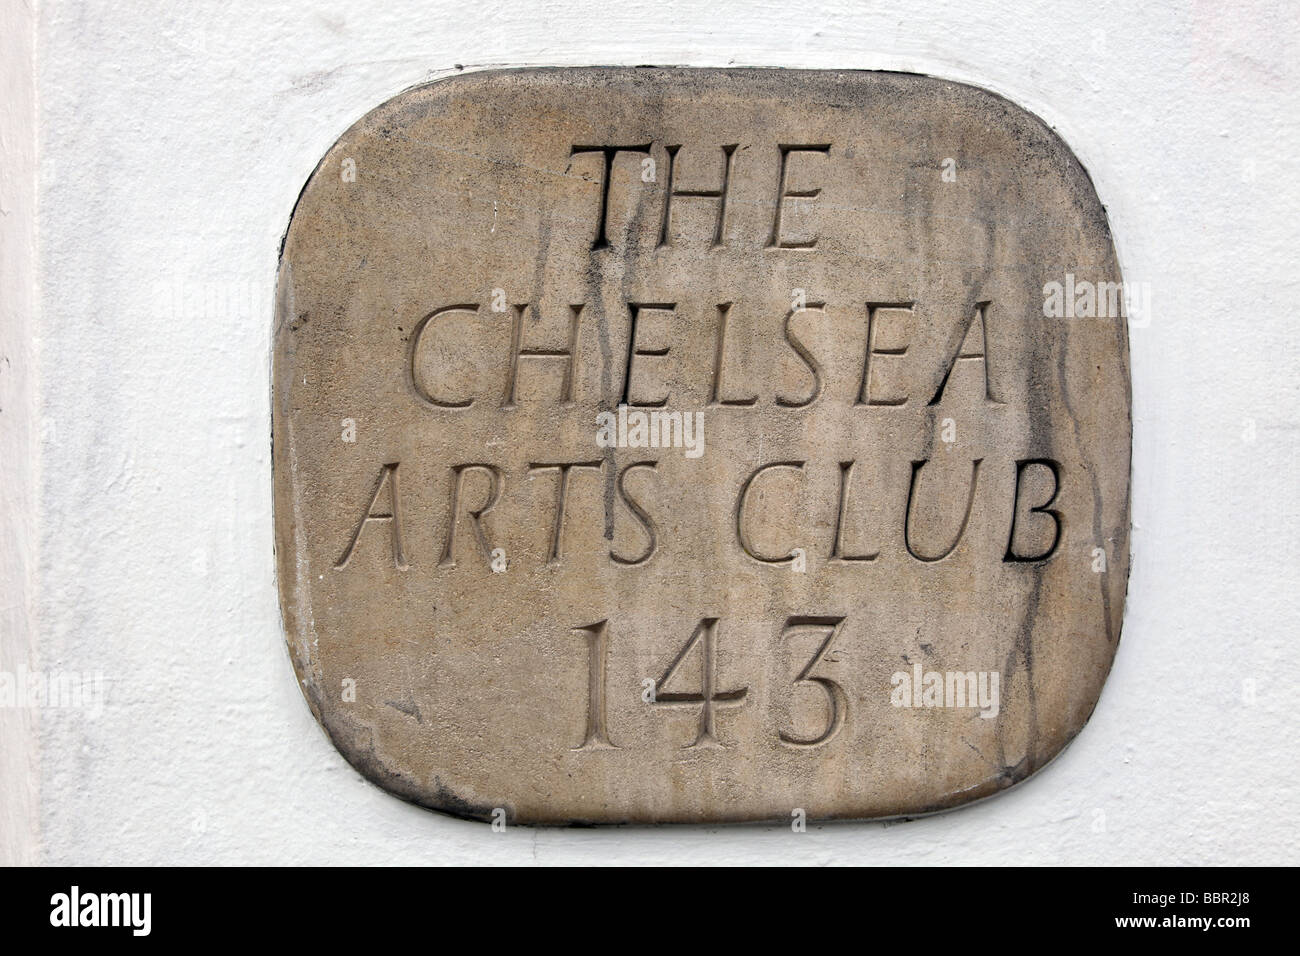 The Chelsea Arts Club wall plaque Old Church Street London S W 10 Stock Photo